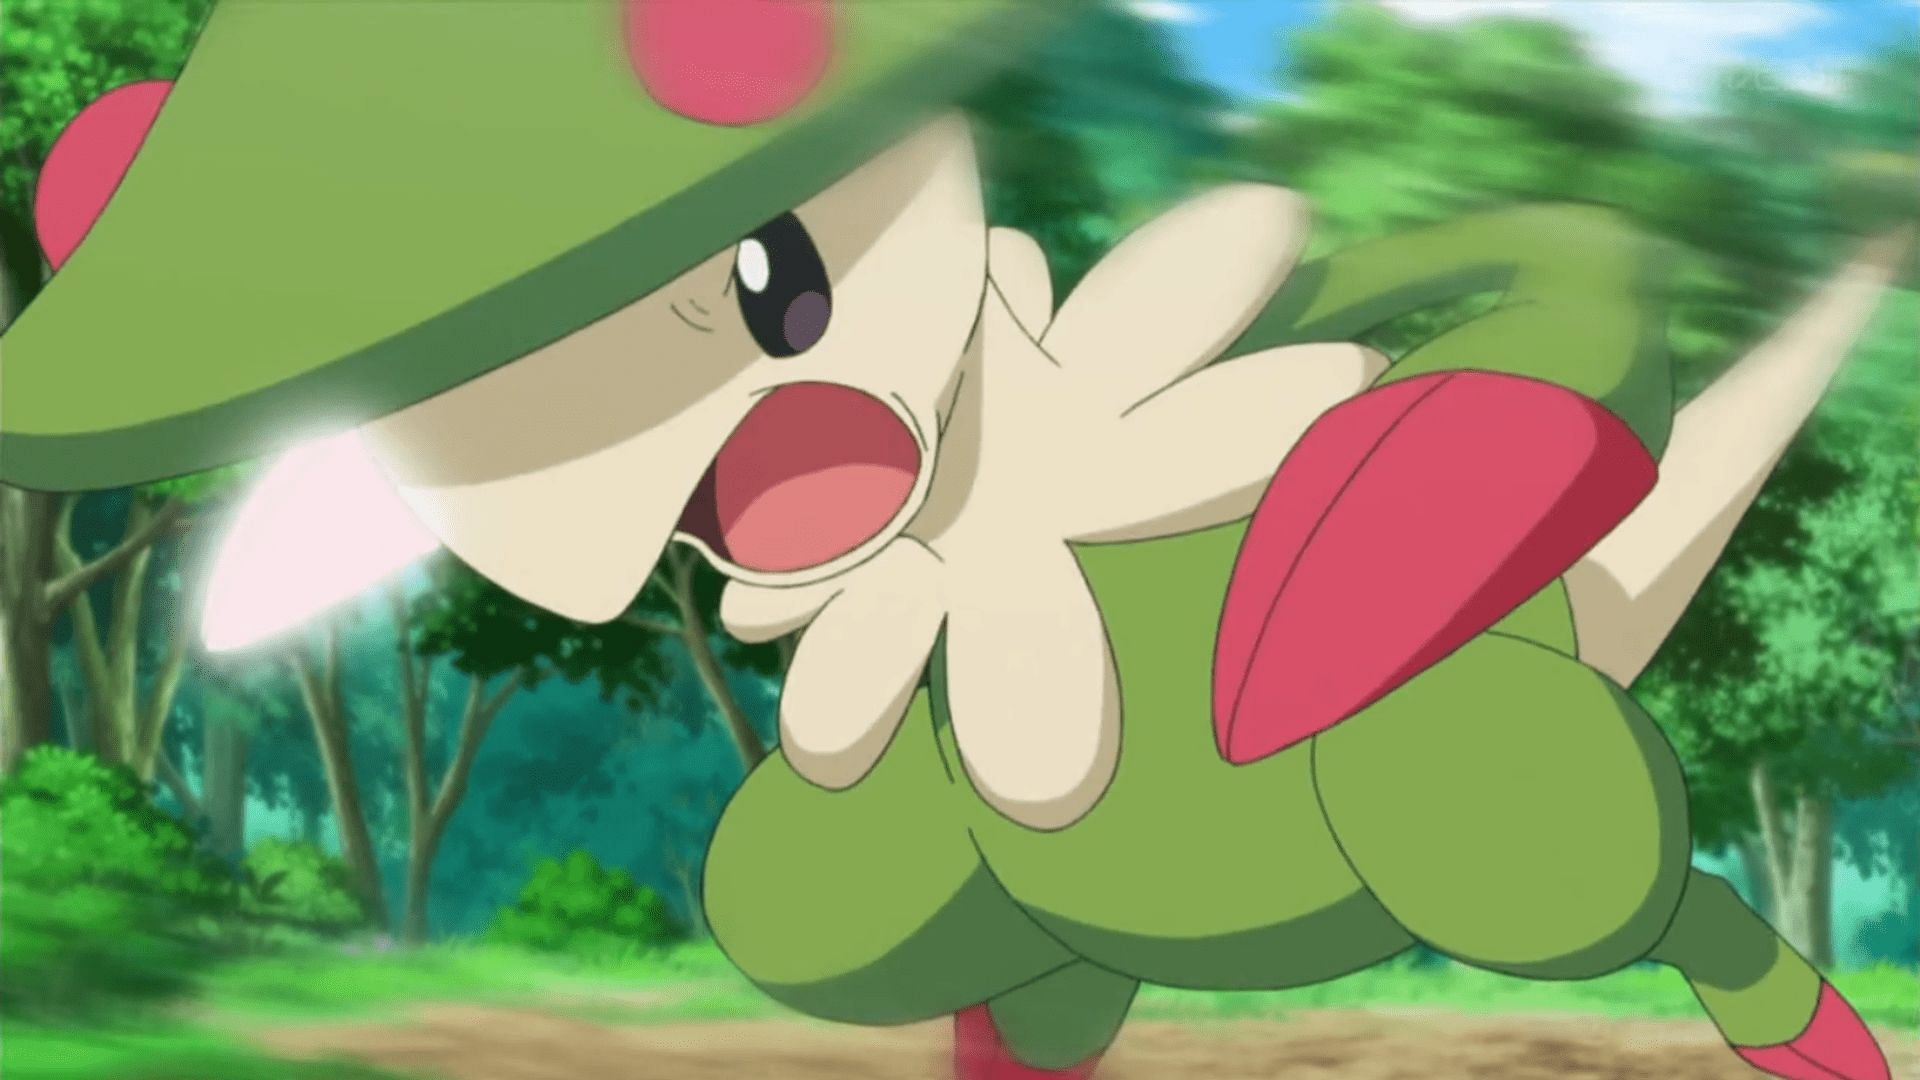 Breloom using Mach Punch in the anime (image via The Pokemon Company)